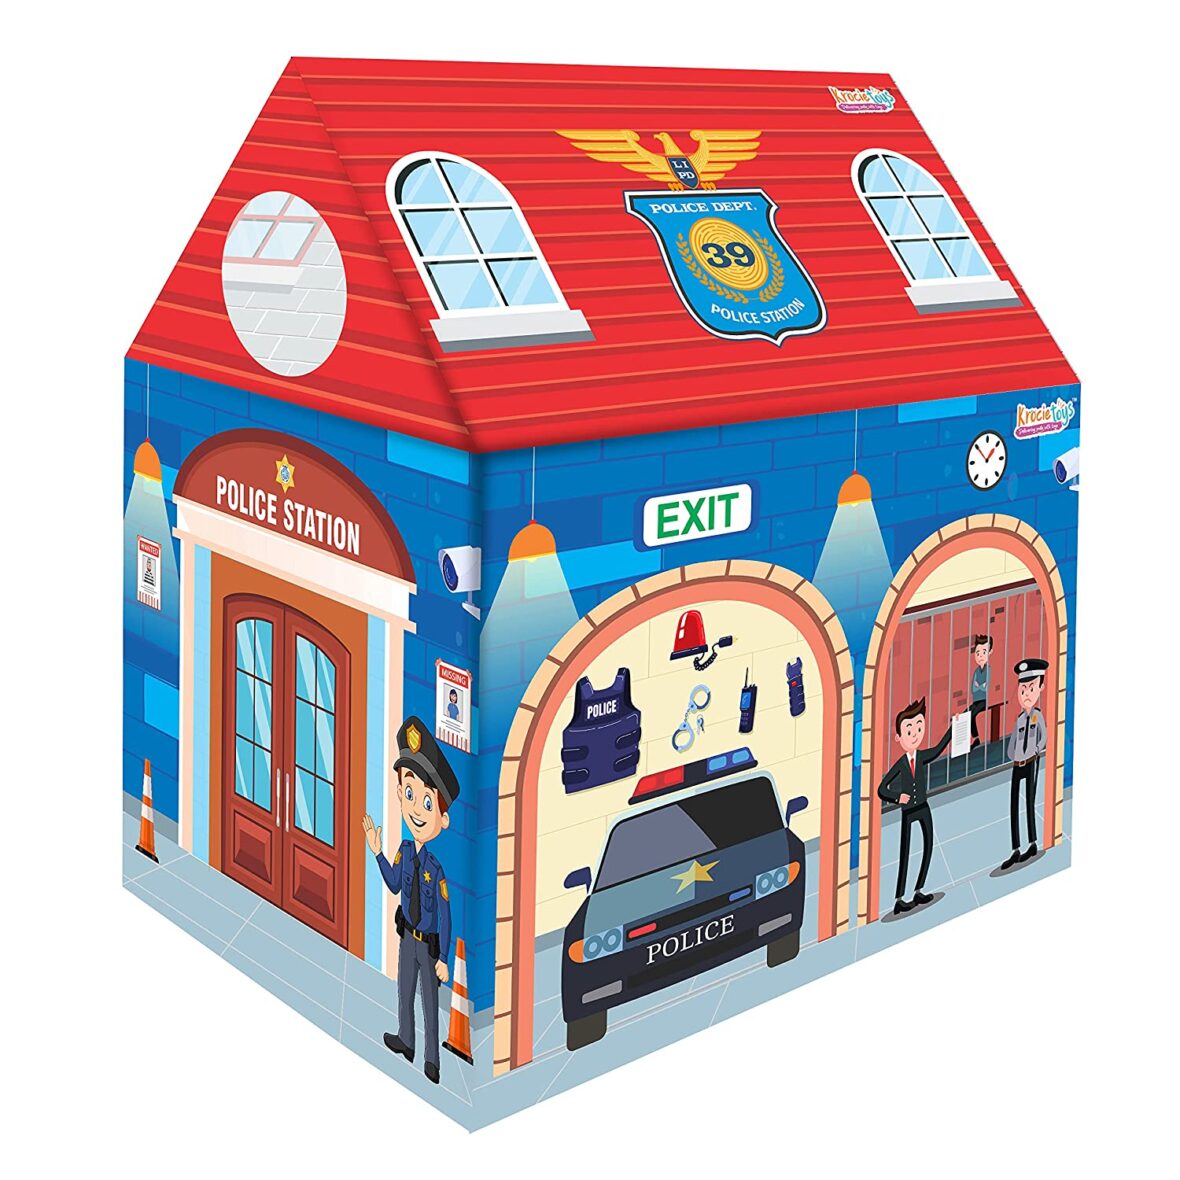 KrocieToys 2 in 1 Police & Fire Station Kids Play House Tent Play Tent for Girls and Boys, Kids Tent for 3 + Years